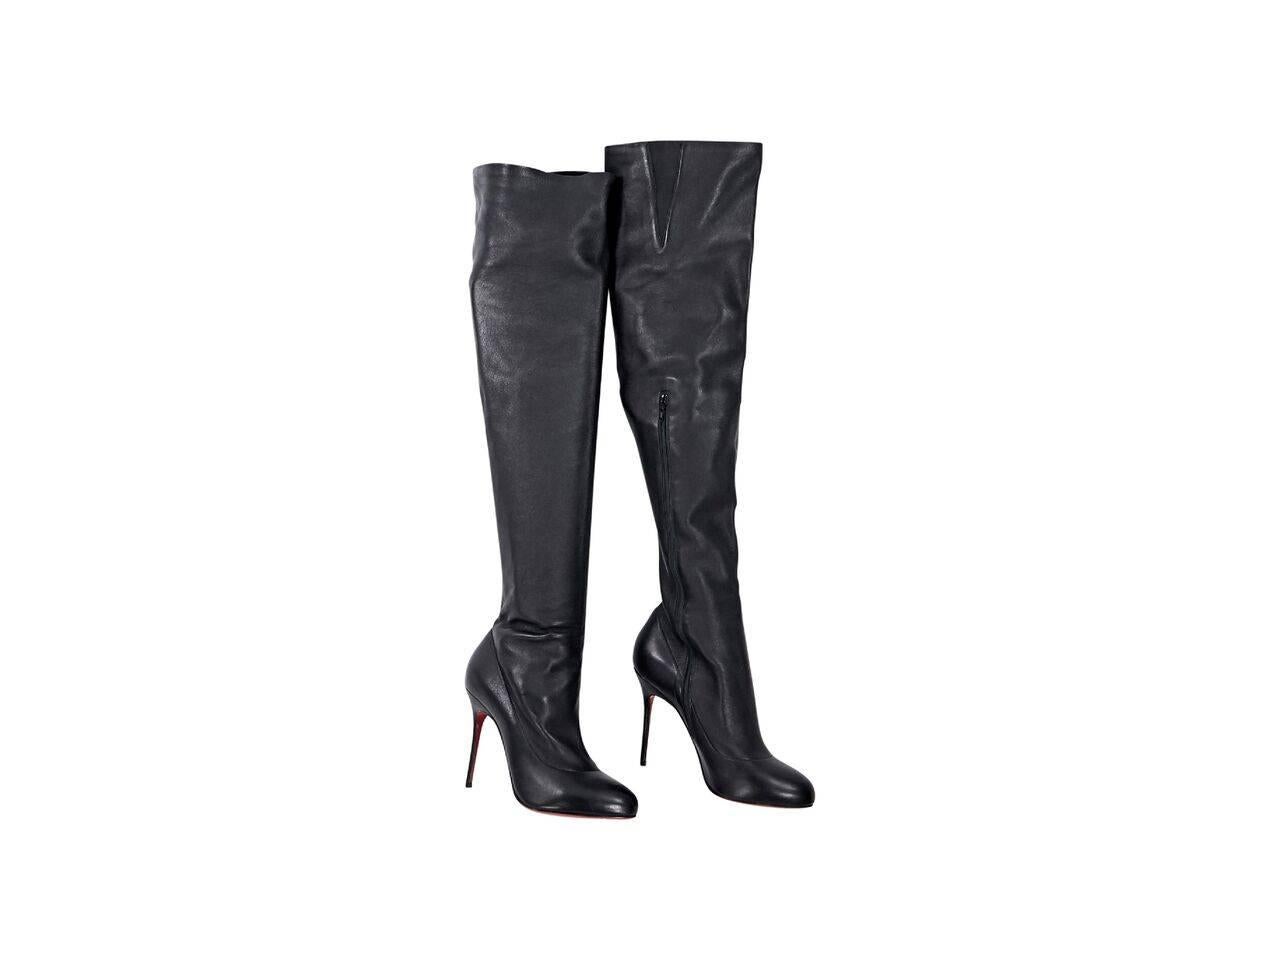 Product details:  Black leather over-the-knee boots by Christian Louboutin.  Inner half zip closure.  Round toe.  Iconic red sole. 
Condition: Pre-owned. Very good.
Est. Retail $ 2,000.00